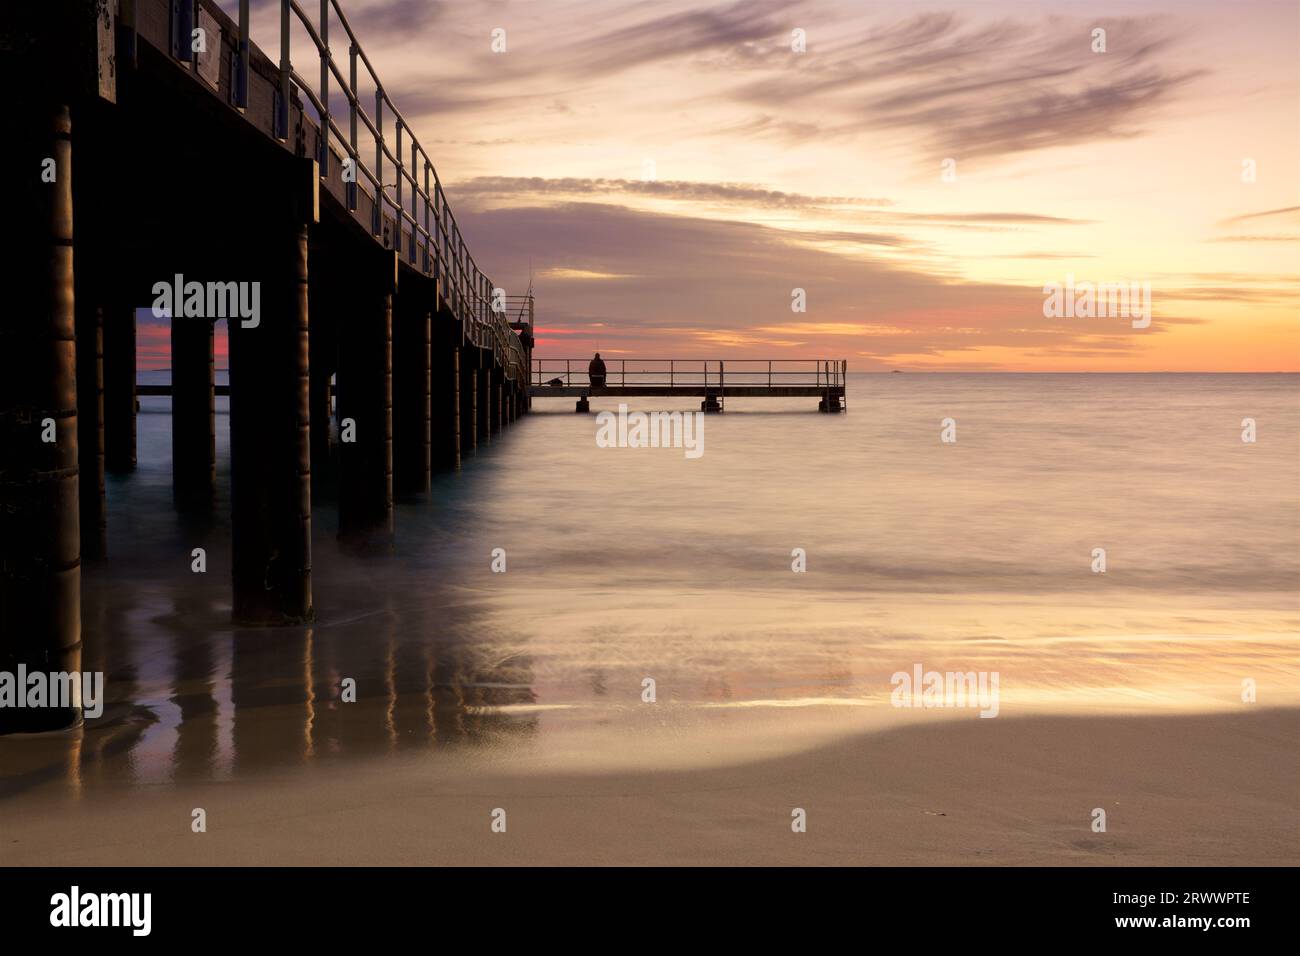 Sunset at Coogee Beach Jetty with a person fishing in the southern suburbs of Perth, Western Australia Stock Photo